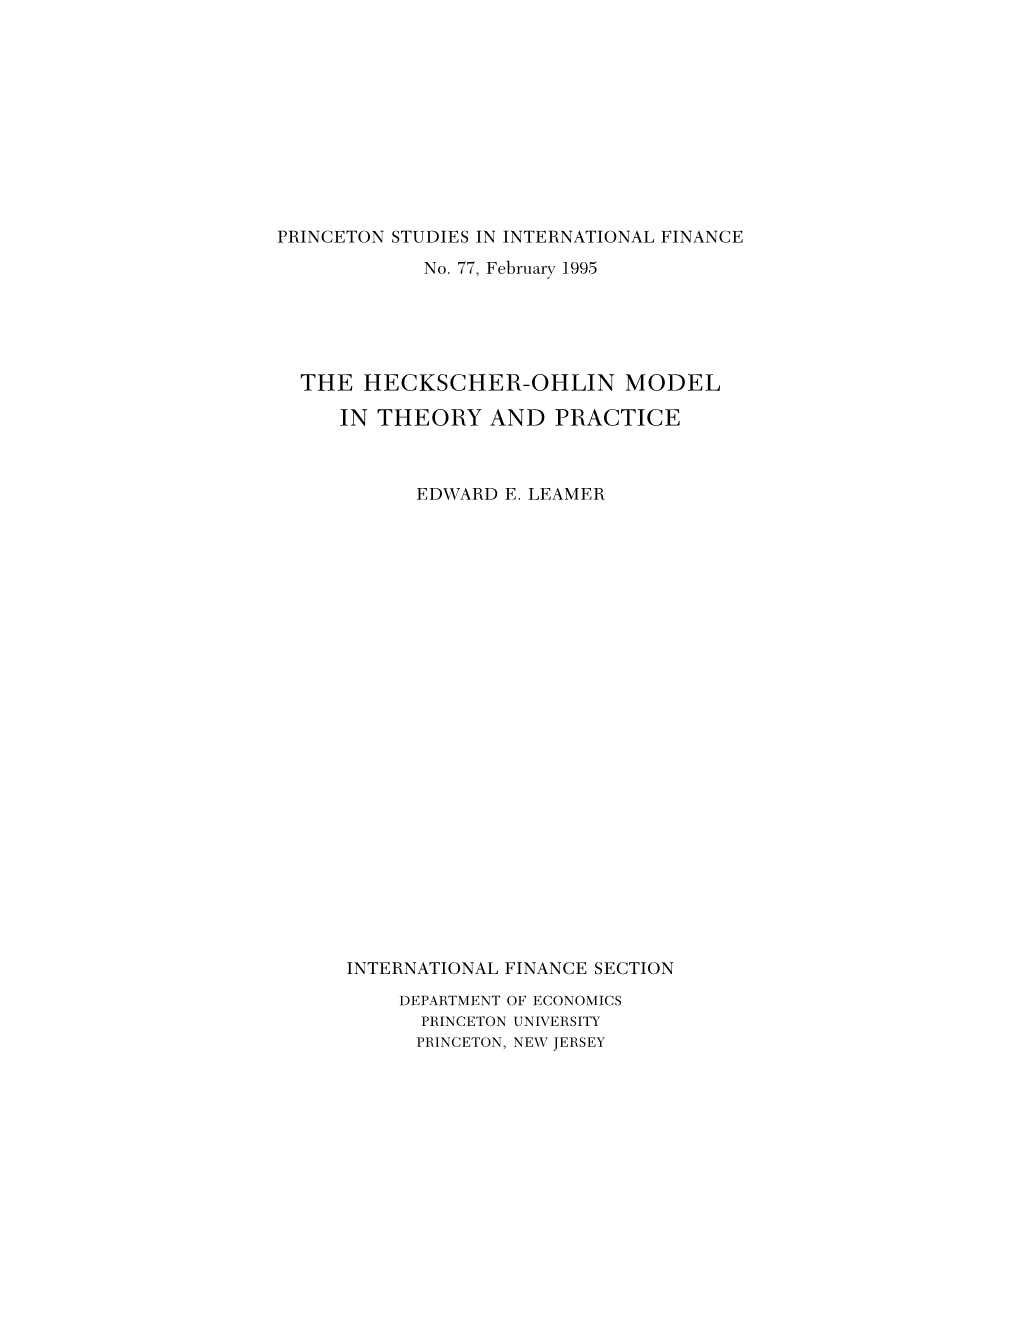 Heckscher-Ohlin Model in Theory and Practice